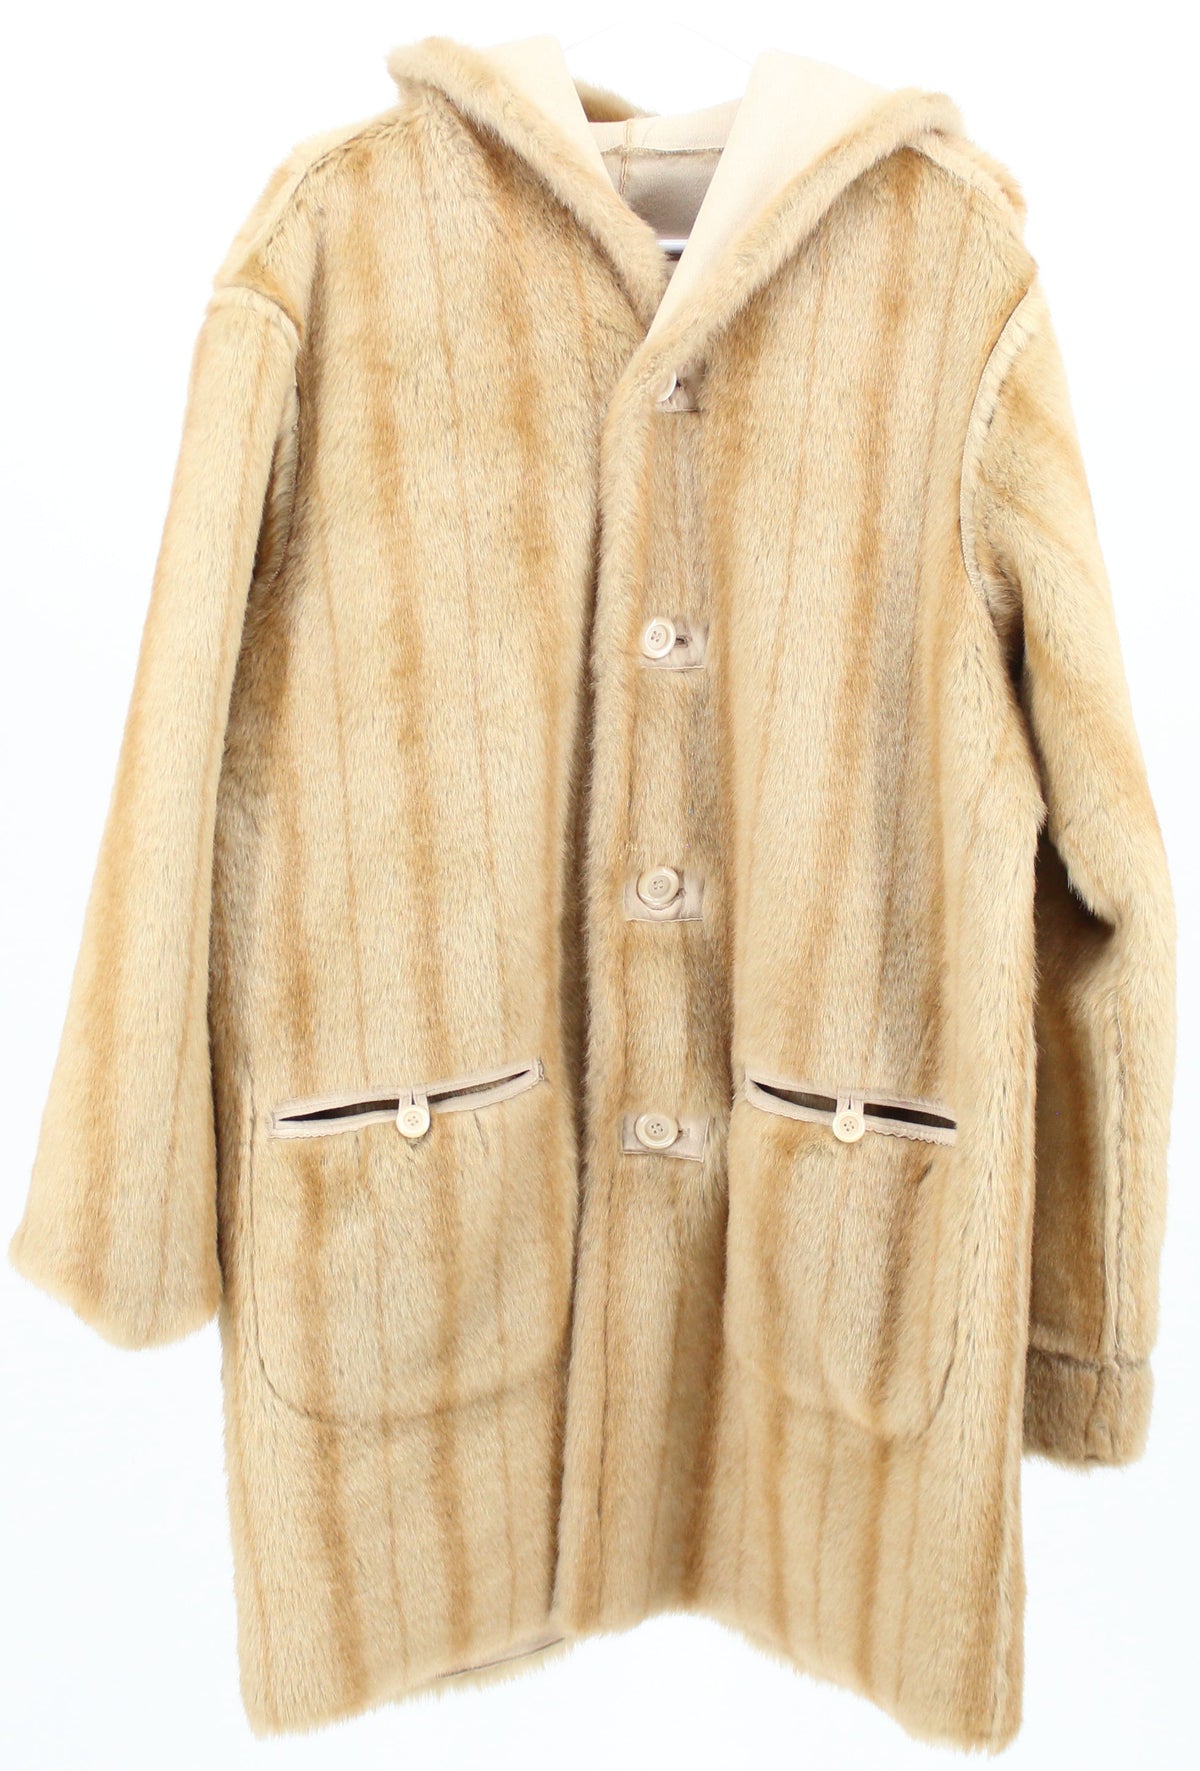 Striped Dark and Light Beige Mid Faux Fur Coat With Hood